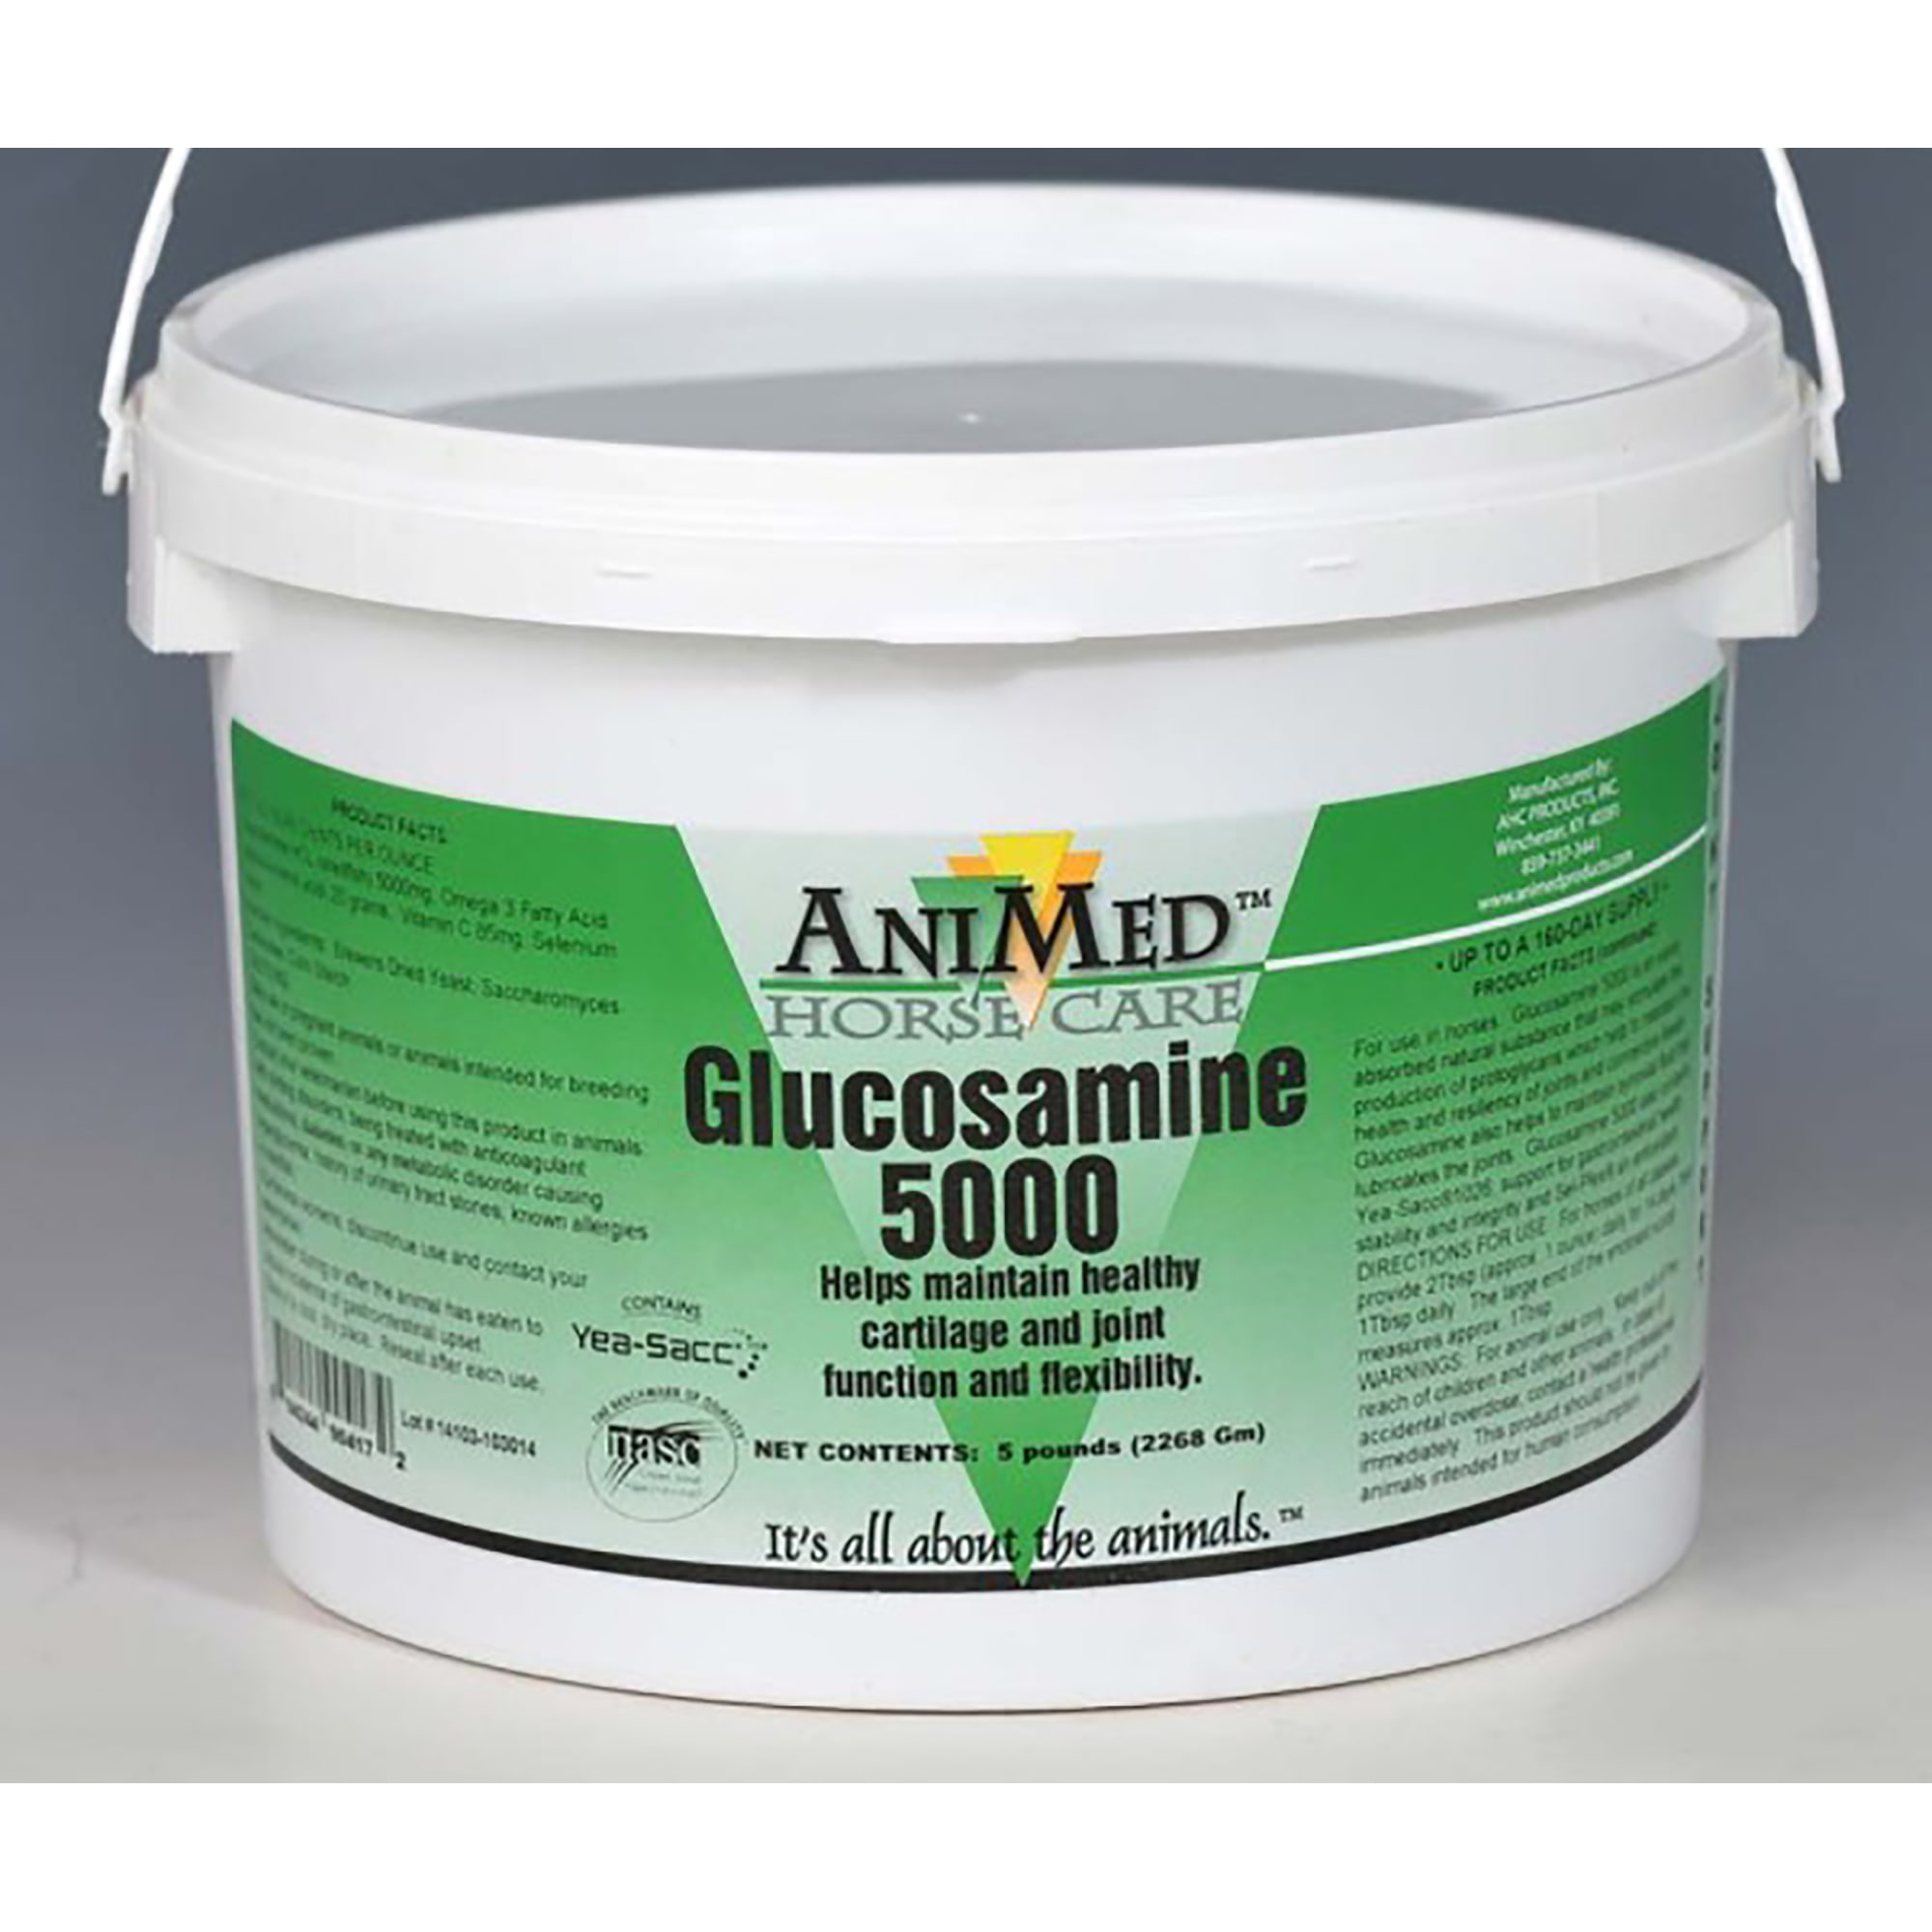 AniMed Glucosamine 5000 Equine Joint Supplement, 5 lbs. | Petco